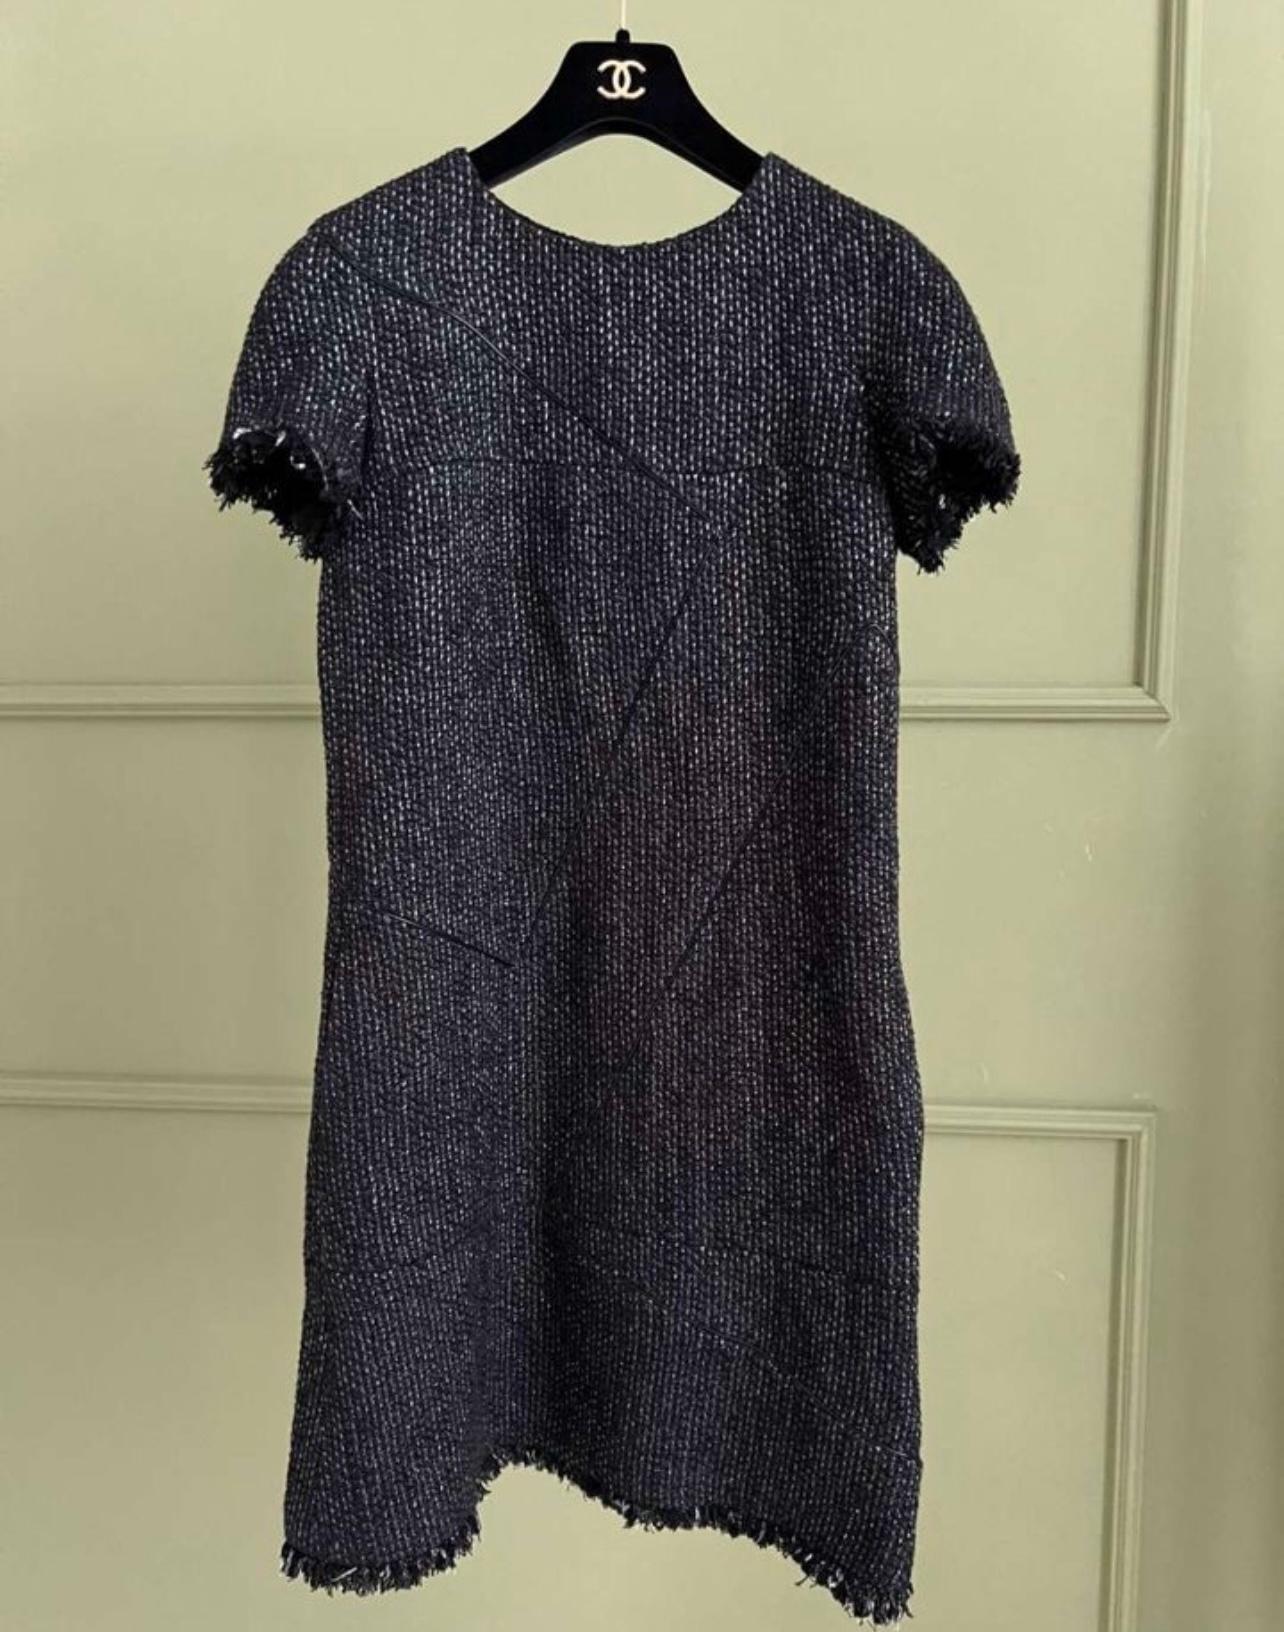 Chanel Black Geometric Tweed Dress  In Excellent Condition For Sale In Dubai, AE